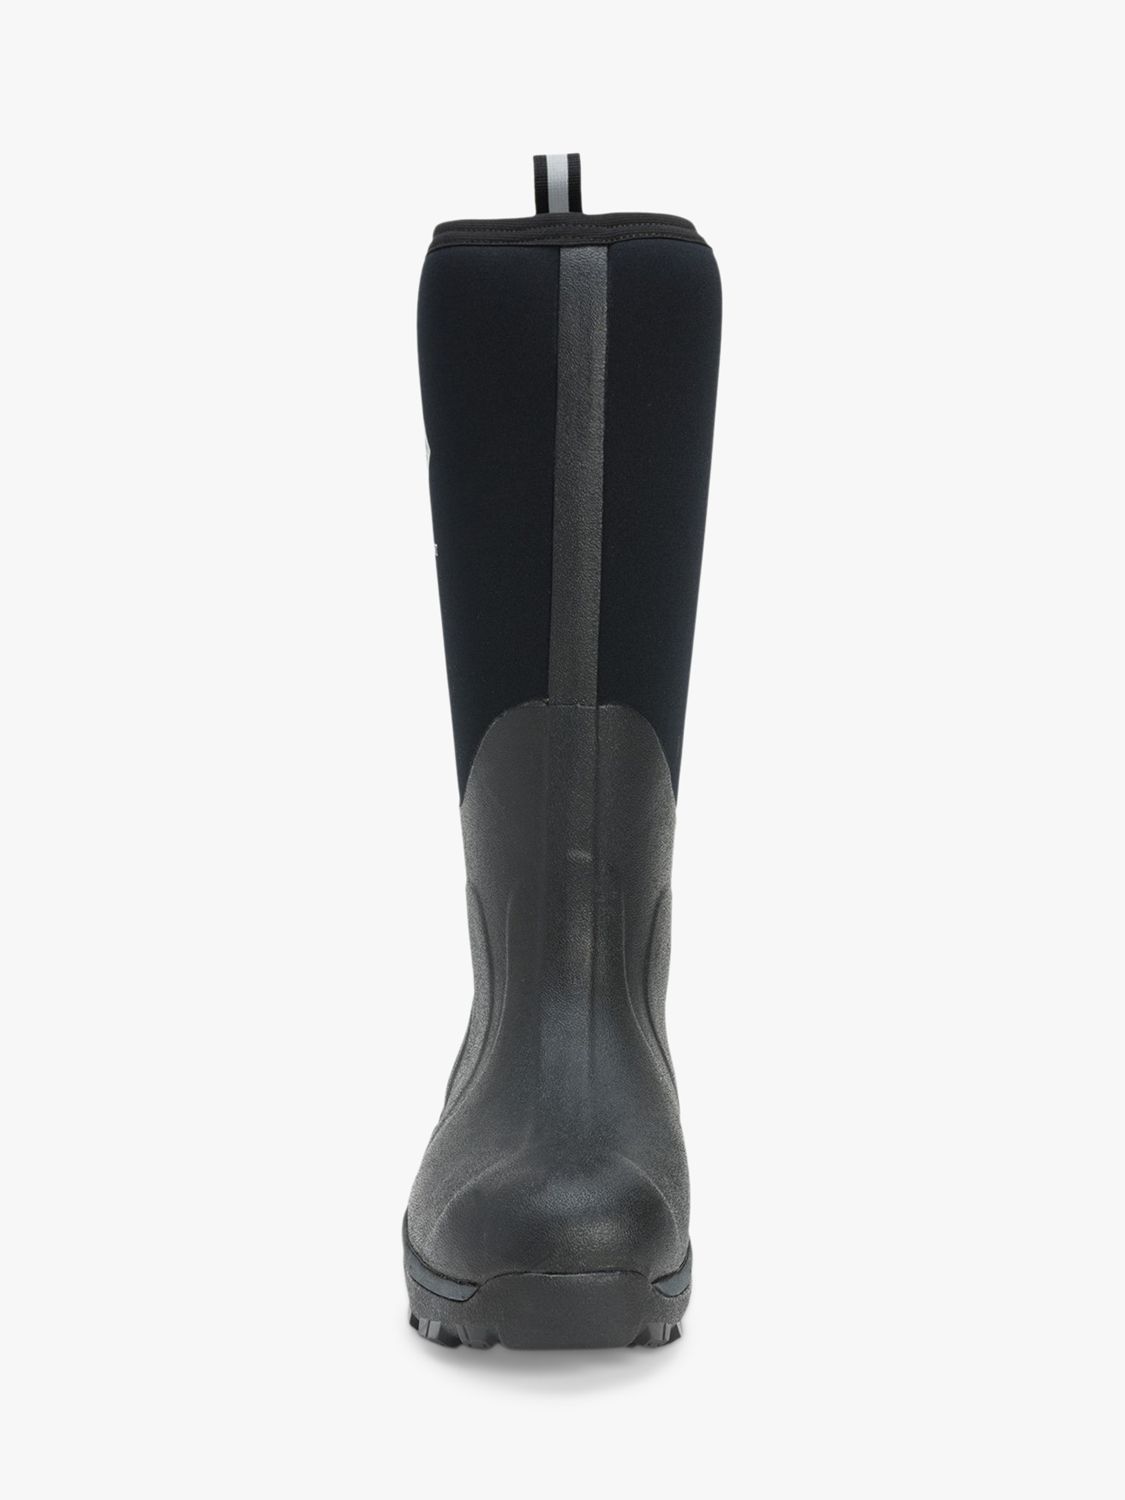 Buy Muck Arctic Sport Pull On Wellington Boots Online at johnlewis.com